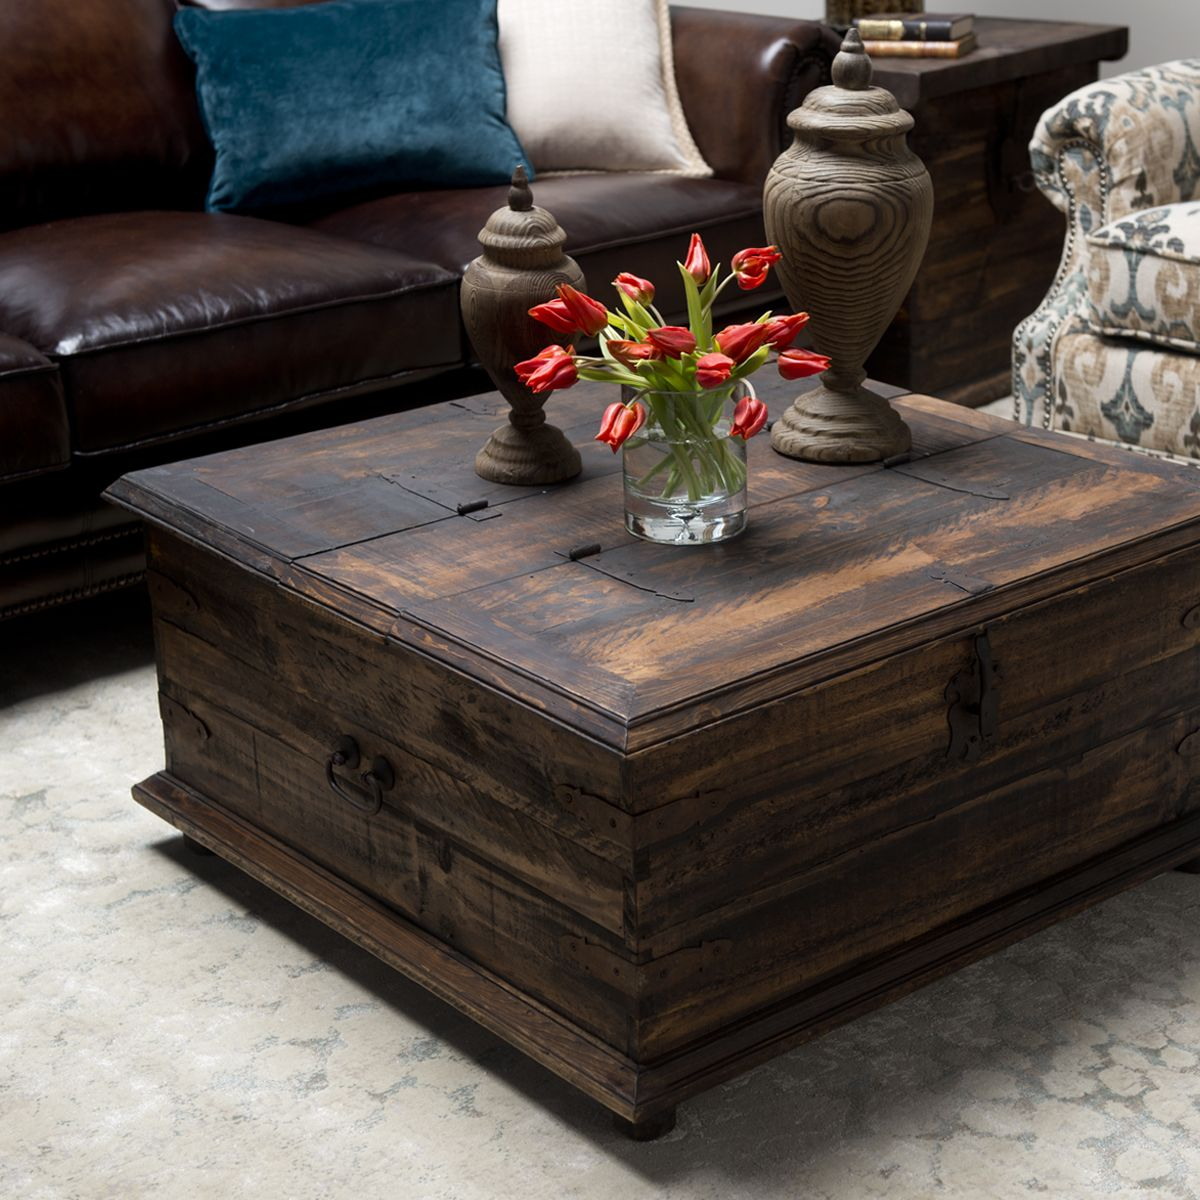 Rustic Coffee Tabletrunk Includes Hinged Lid For Handy Storage with regard to sizing 1200 X 1200